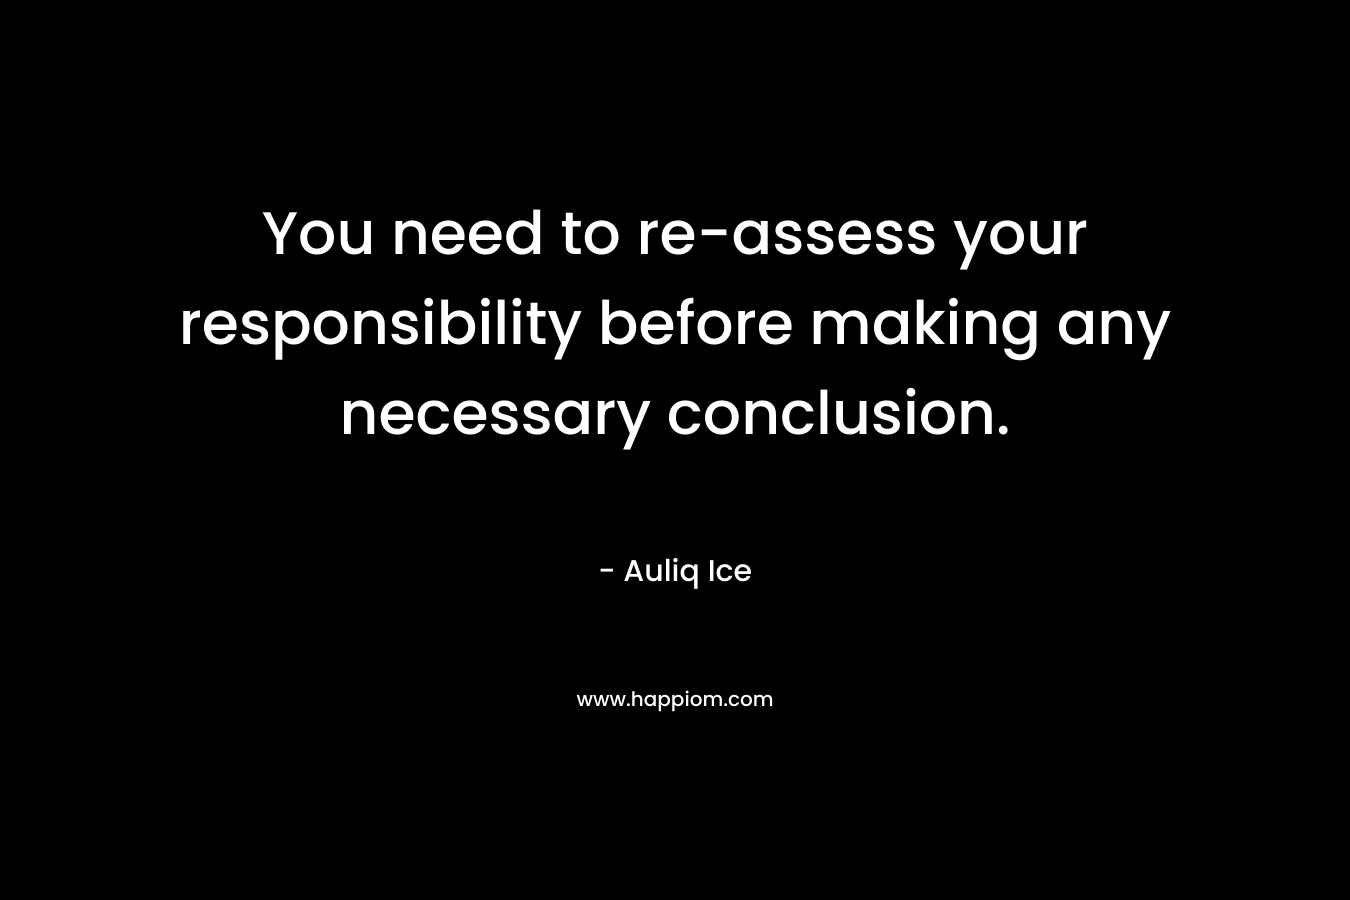 You need to re-assess your responsibility before making any necessary conclusion. – Auliq Ice